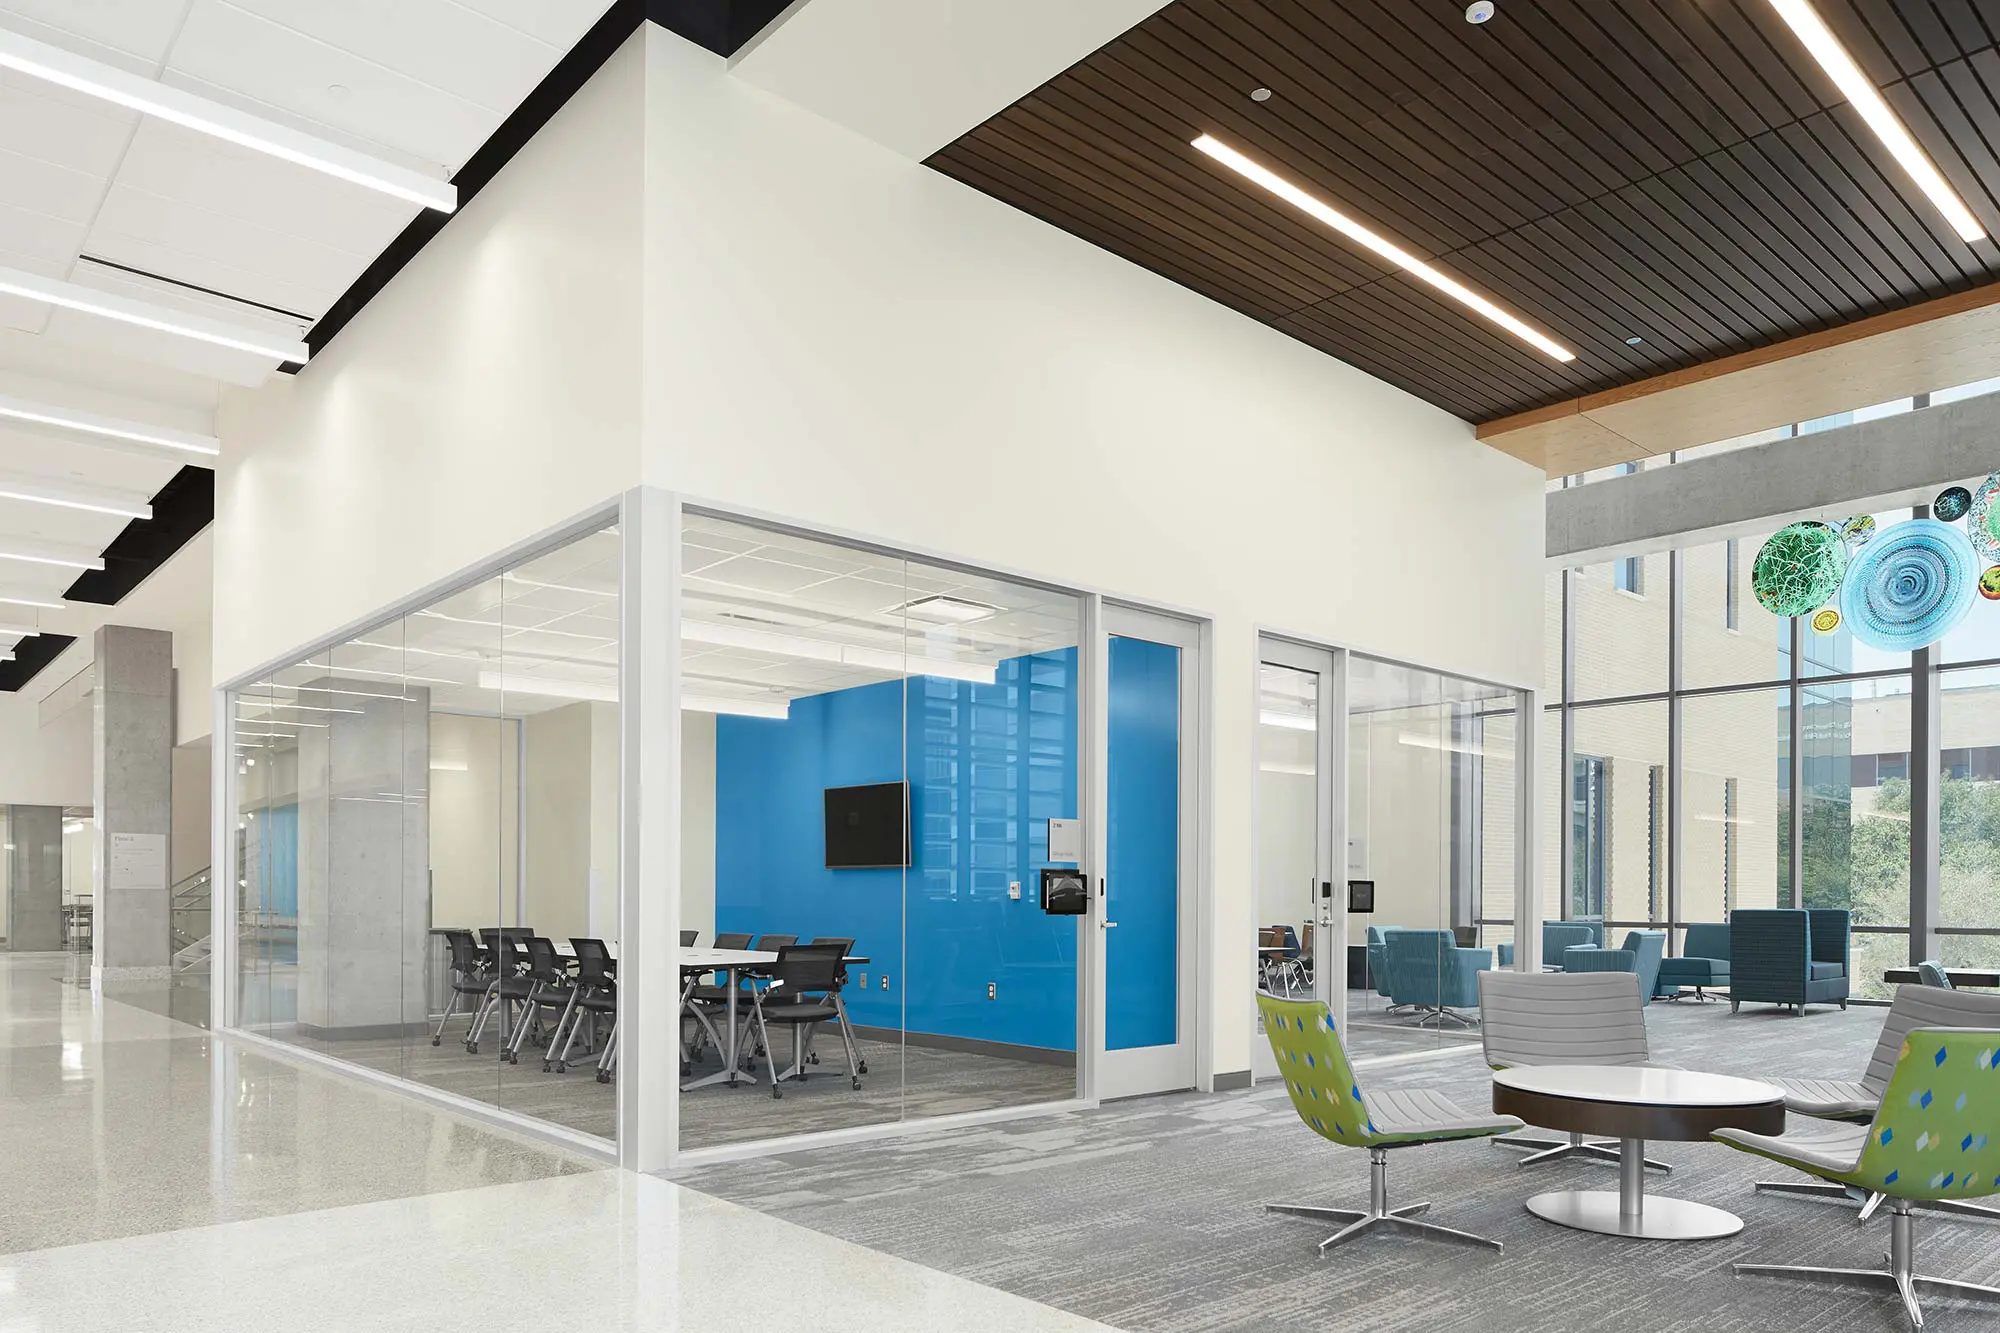 Meeting room with glass walls in the lobby of a learning center.